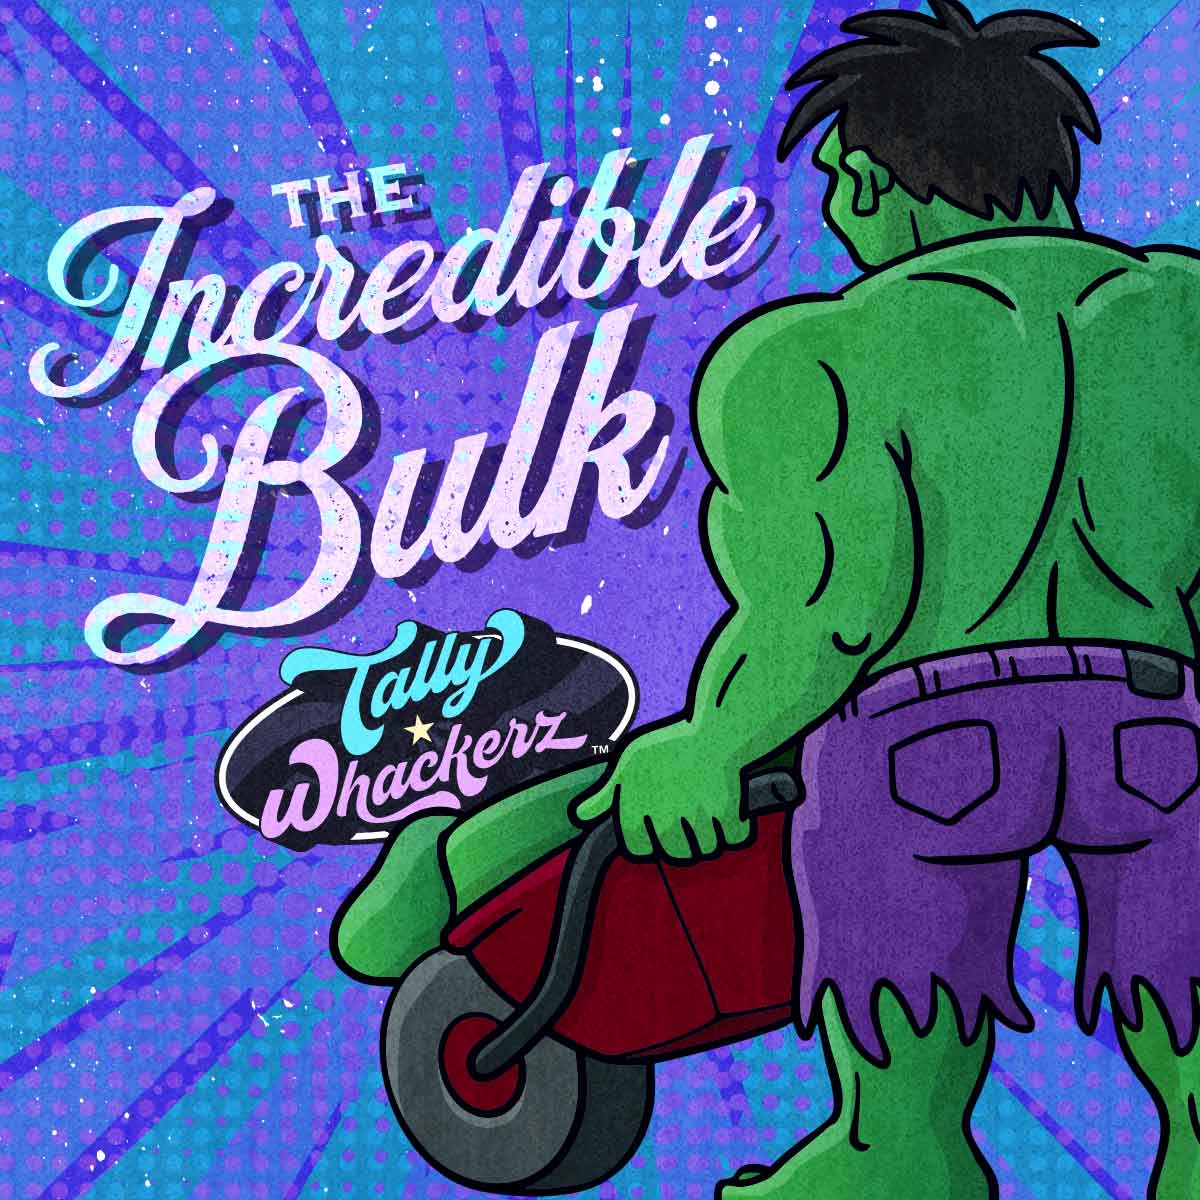 The Incredible Bulk! Products